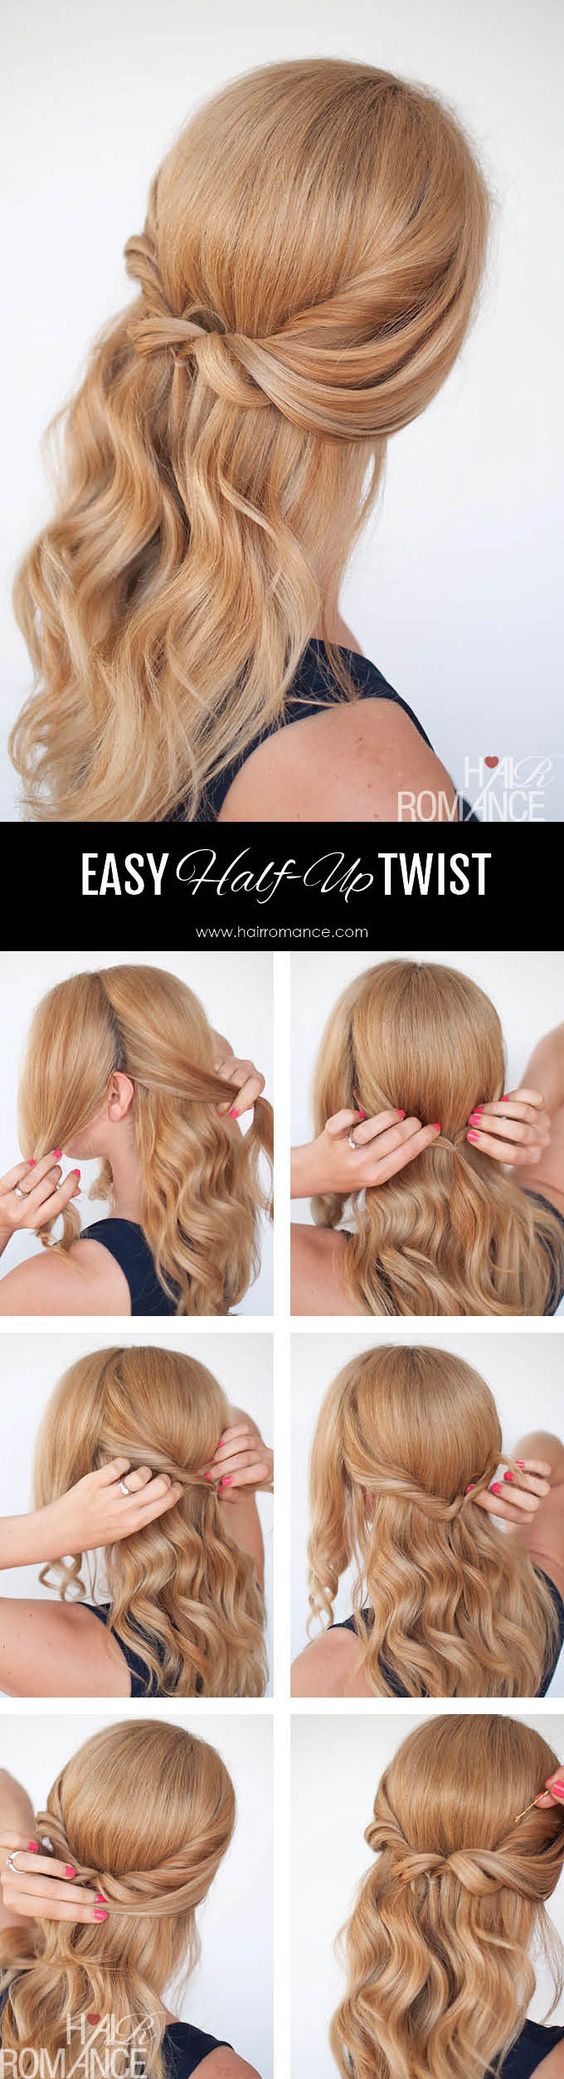 Easy half-up hairstyle over